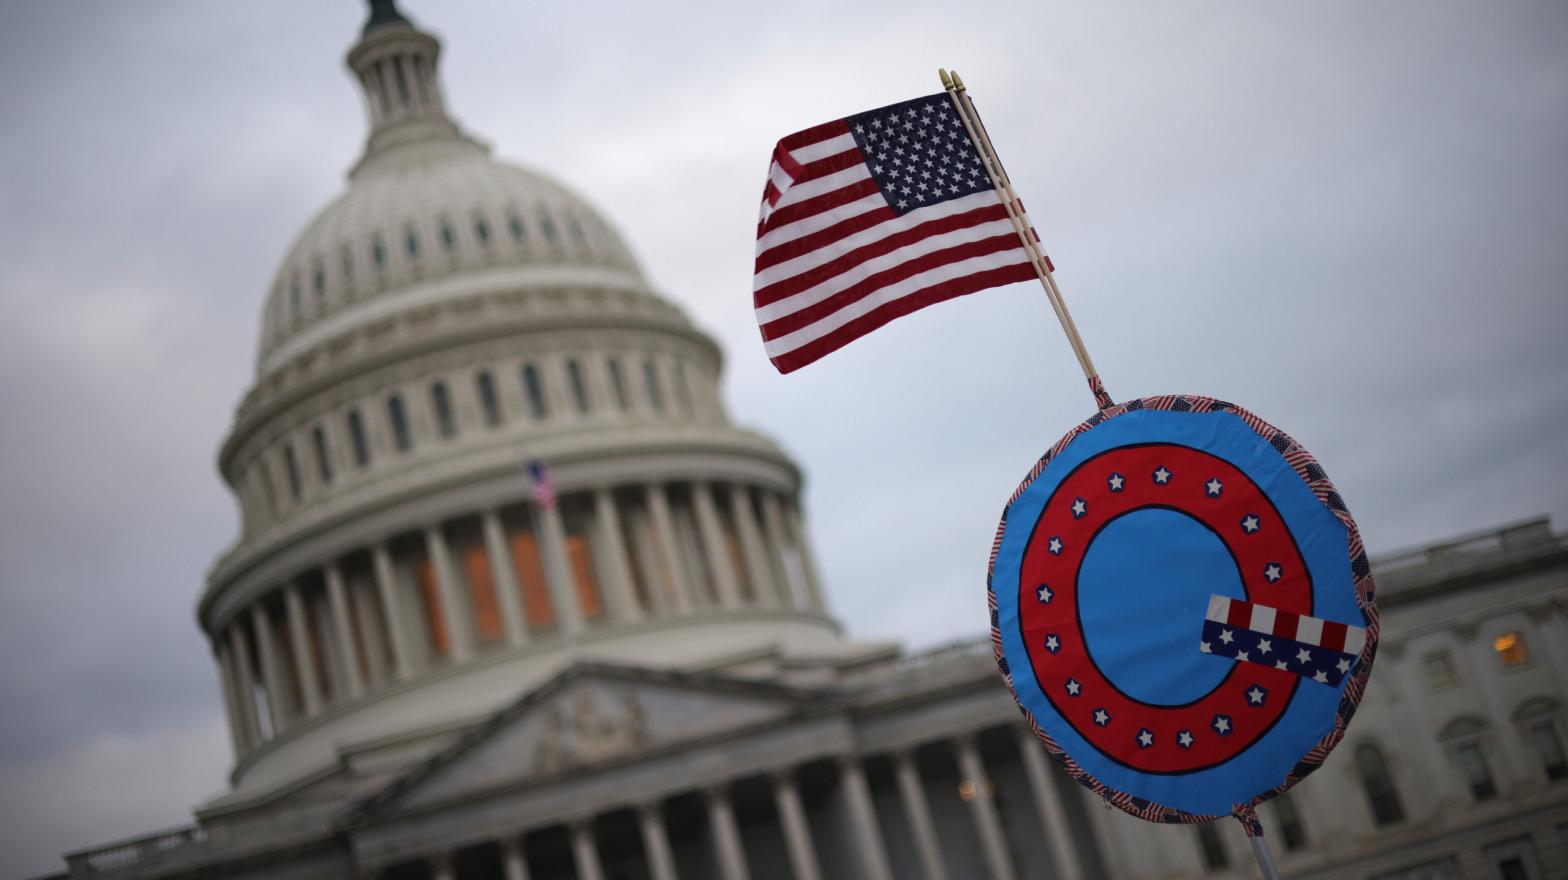 WASHINGTON, DC - JANUARY 06: Supporters of U.S. President Donald Trump fly a U.S. flag with a symbol from the group QAnon as they gather outside the U.S. Capitol January 06, 2021 in Washington, DC.  (Photo: Win McNamee, Getty Images)